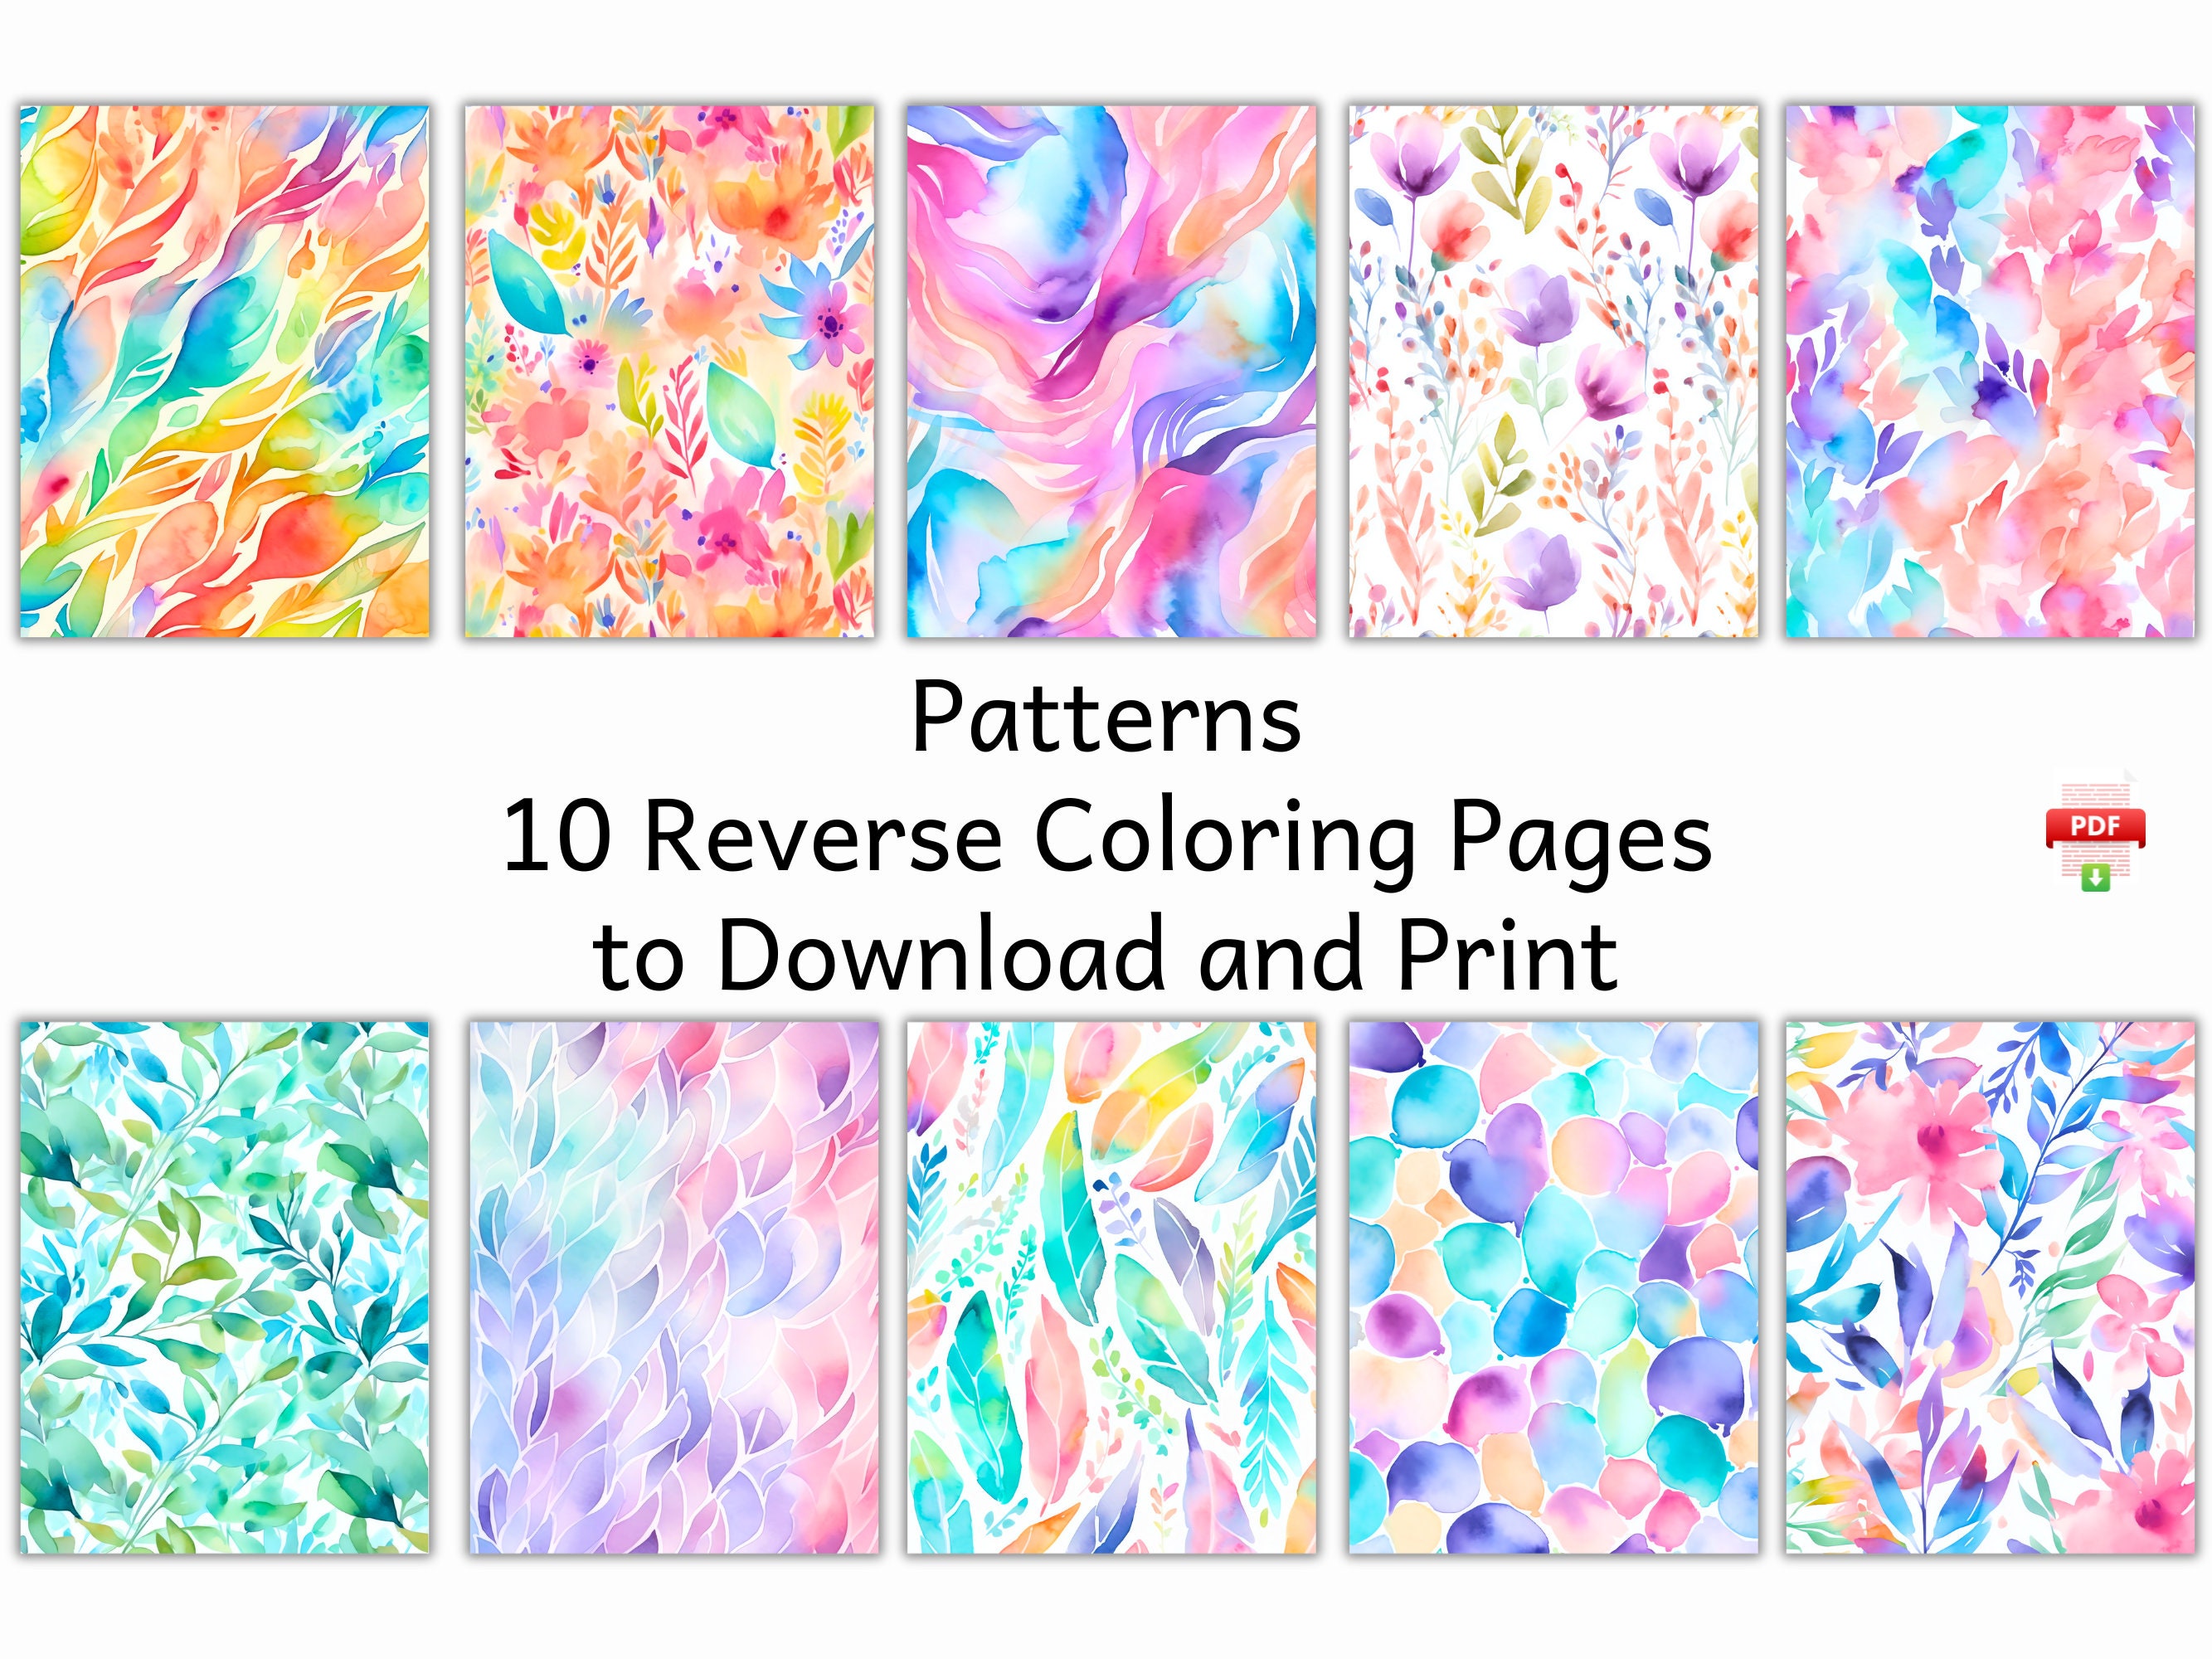 Reverse Coloring Book - Mindful Coloring Books For Adults, Men, Women,  Teens and Children - Anxiety Relief and Relaxation: Color Books For  Mindfulness